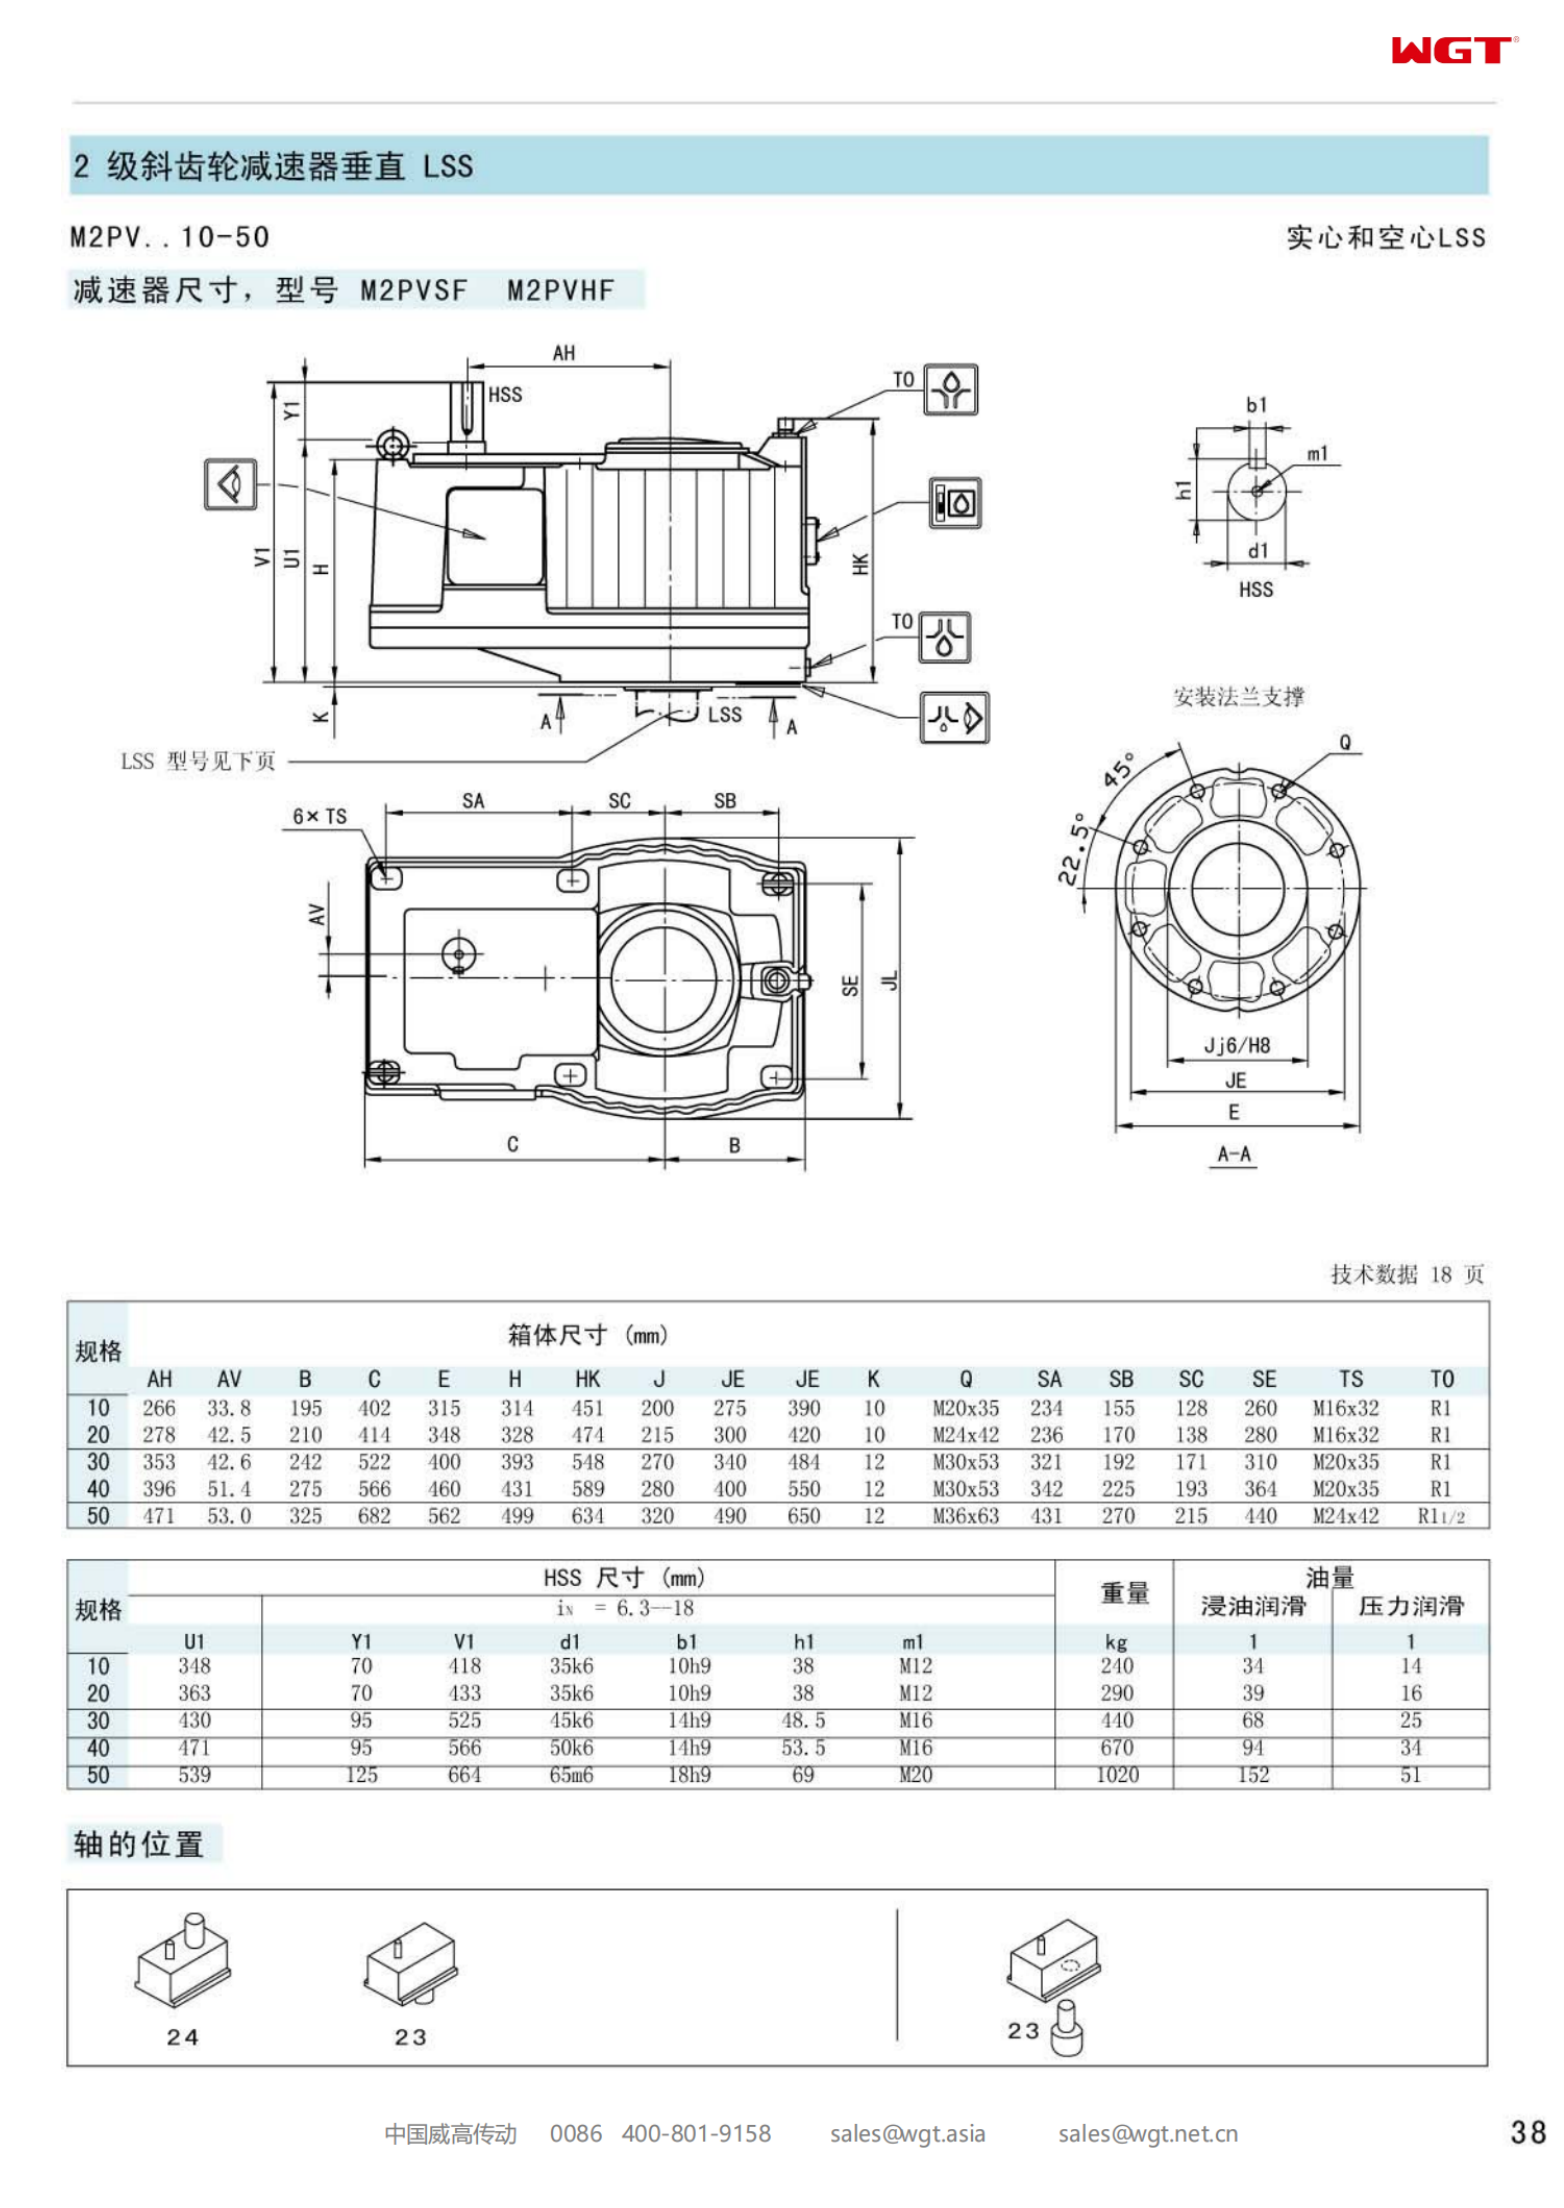 M2PVHF50 Replace_SEW_M_Series Gearbox